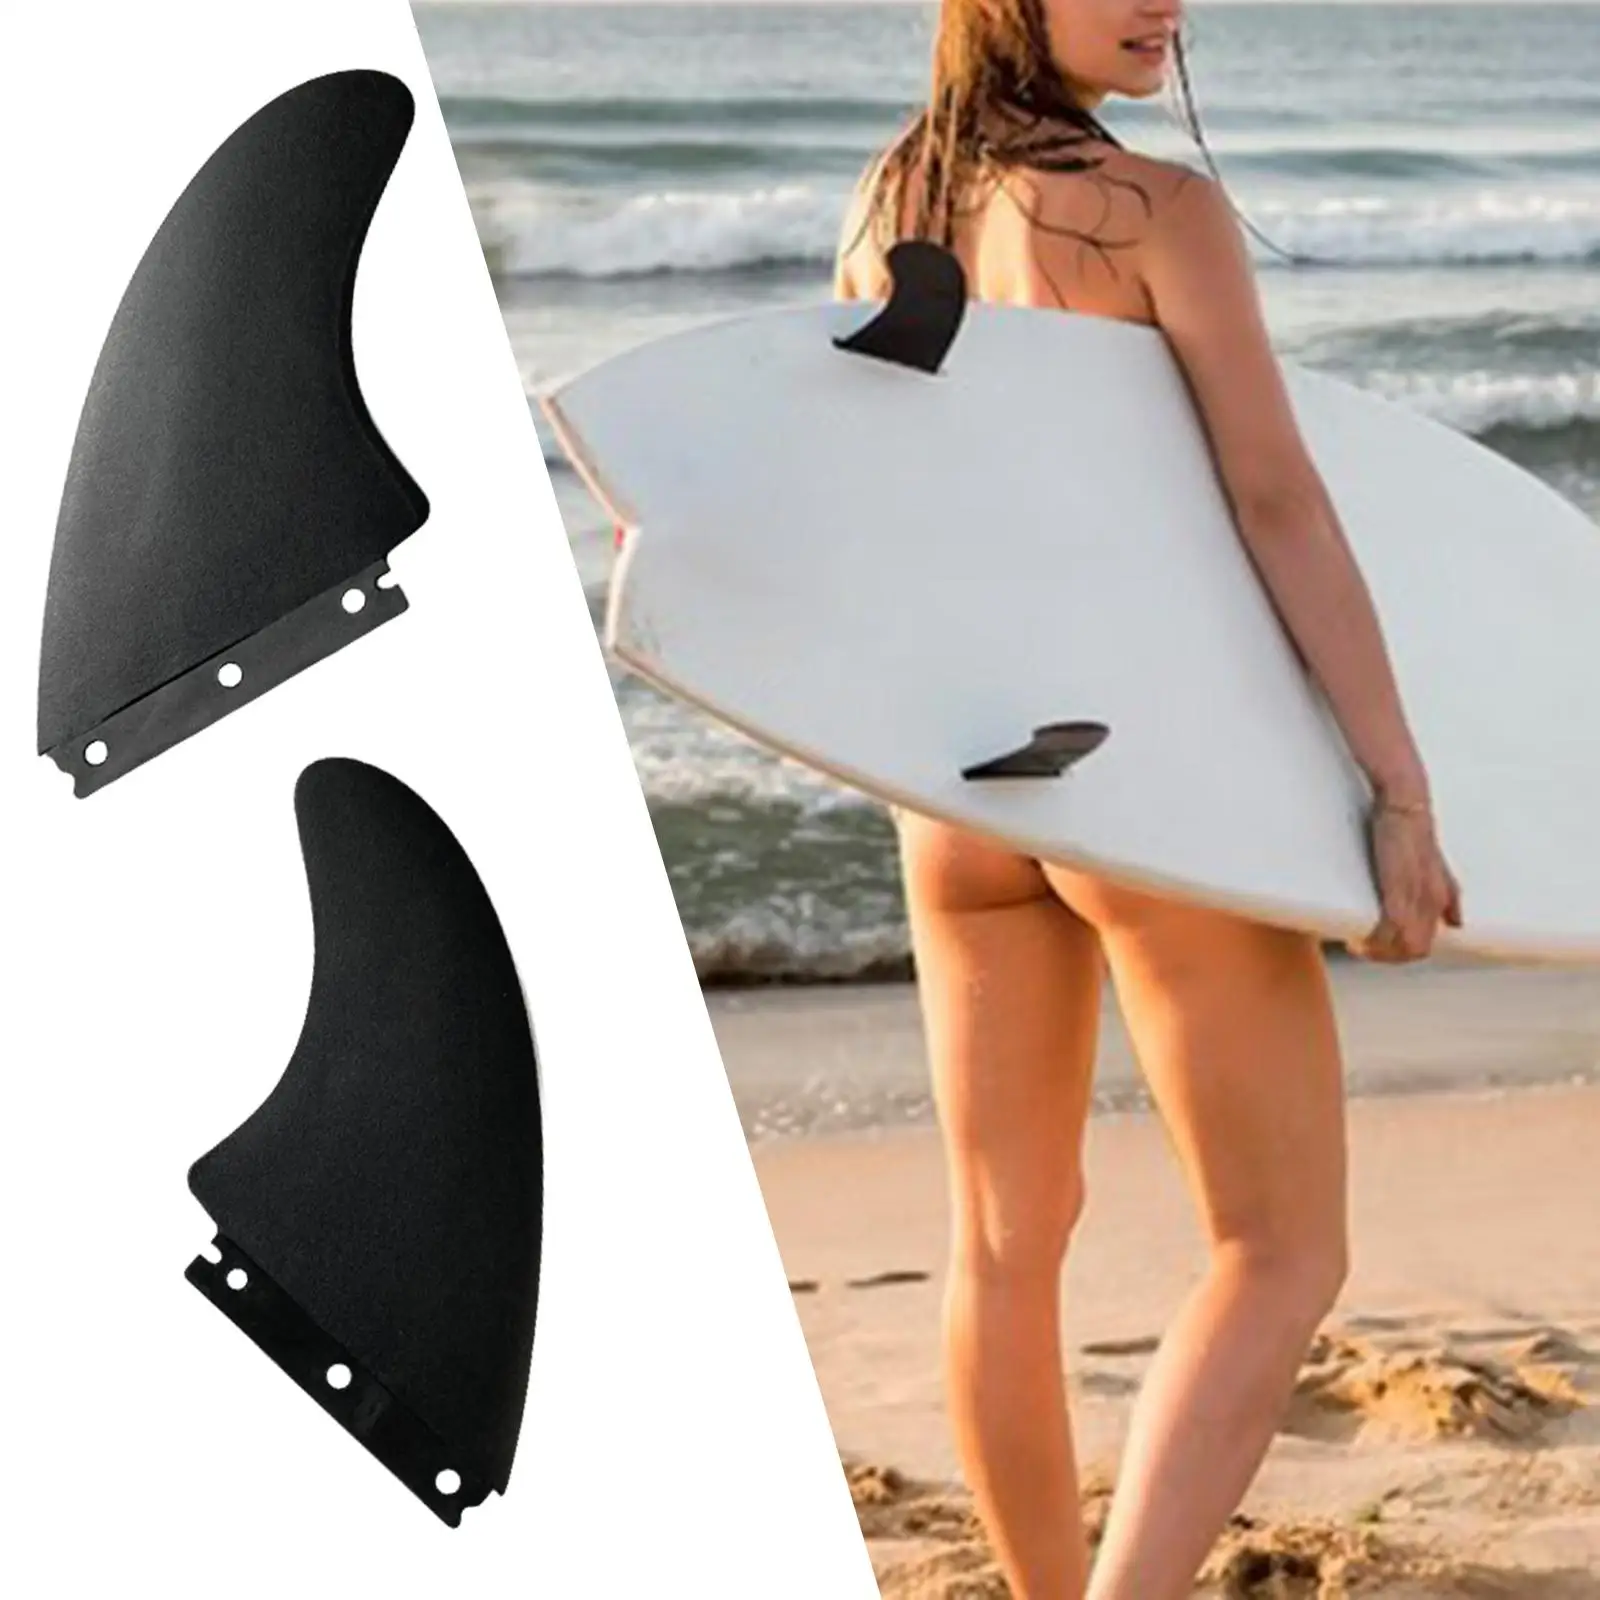 2x Surfboard Fins Water Distributor Replacement Fin Surfing Fin for Canoe